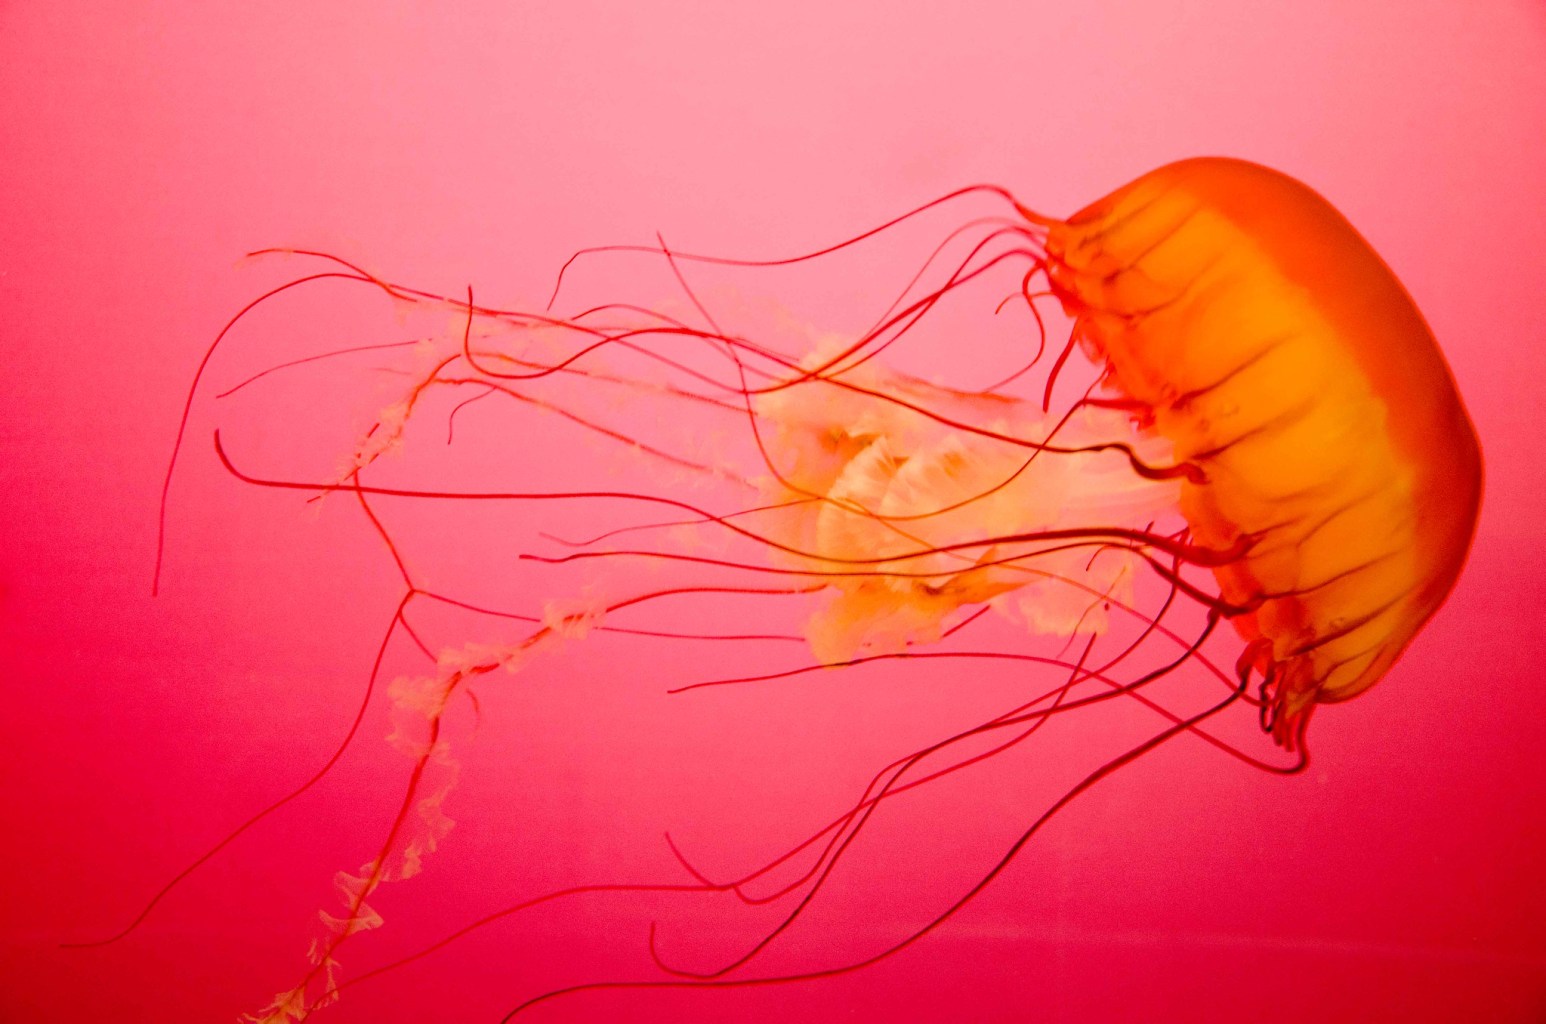 An orange jellyfish against a pink background.